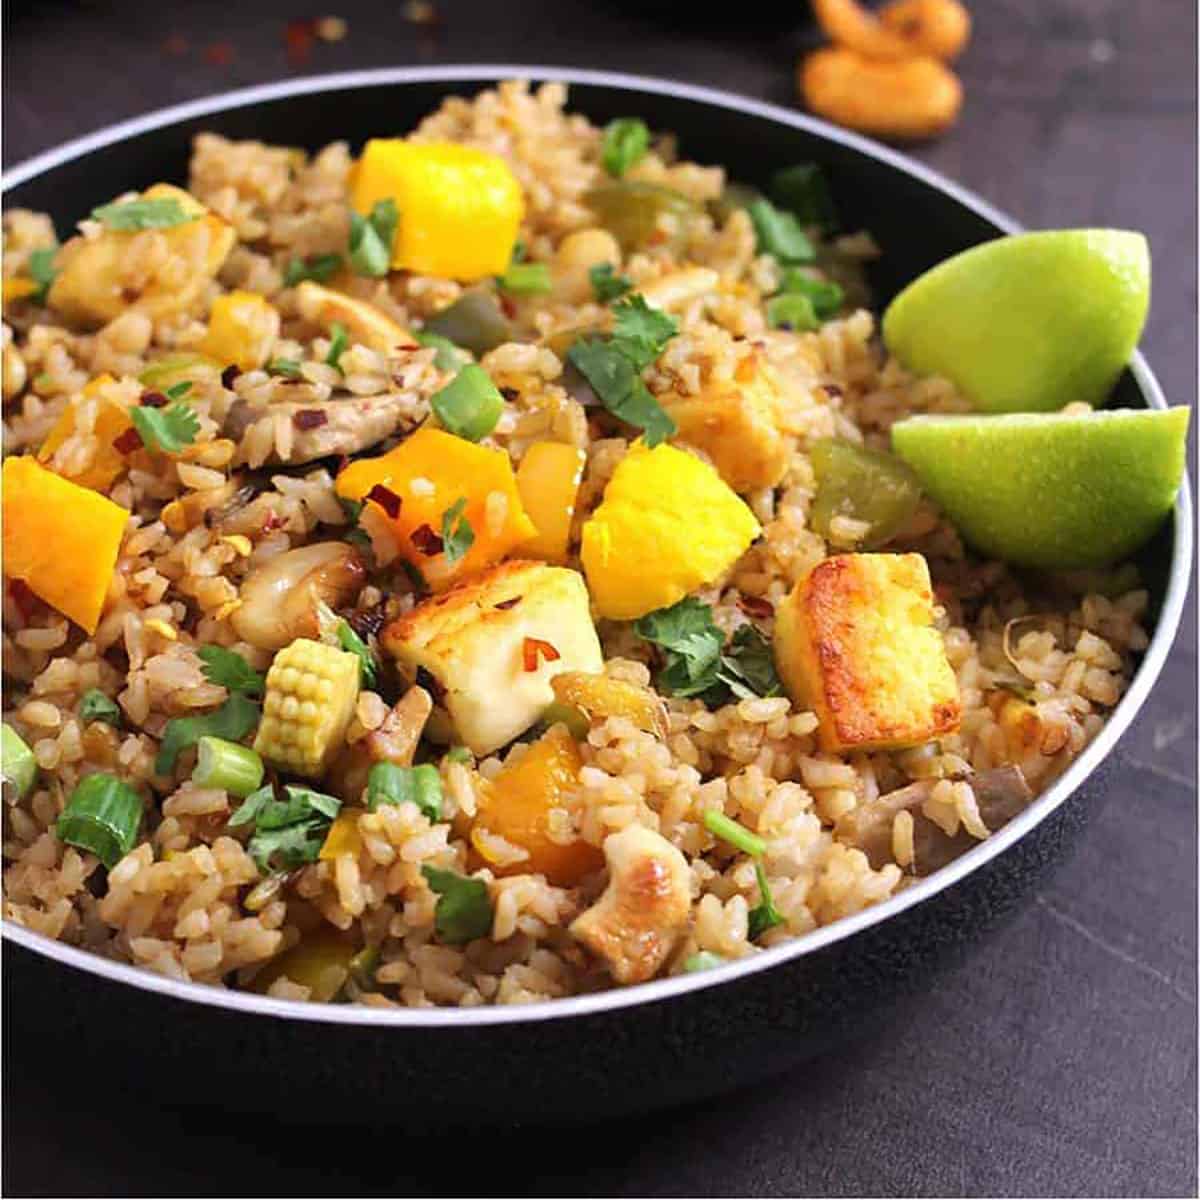 Thai mango fried rice with fresh mangoes, garnished with cilantro and served with lemon wedges.